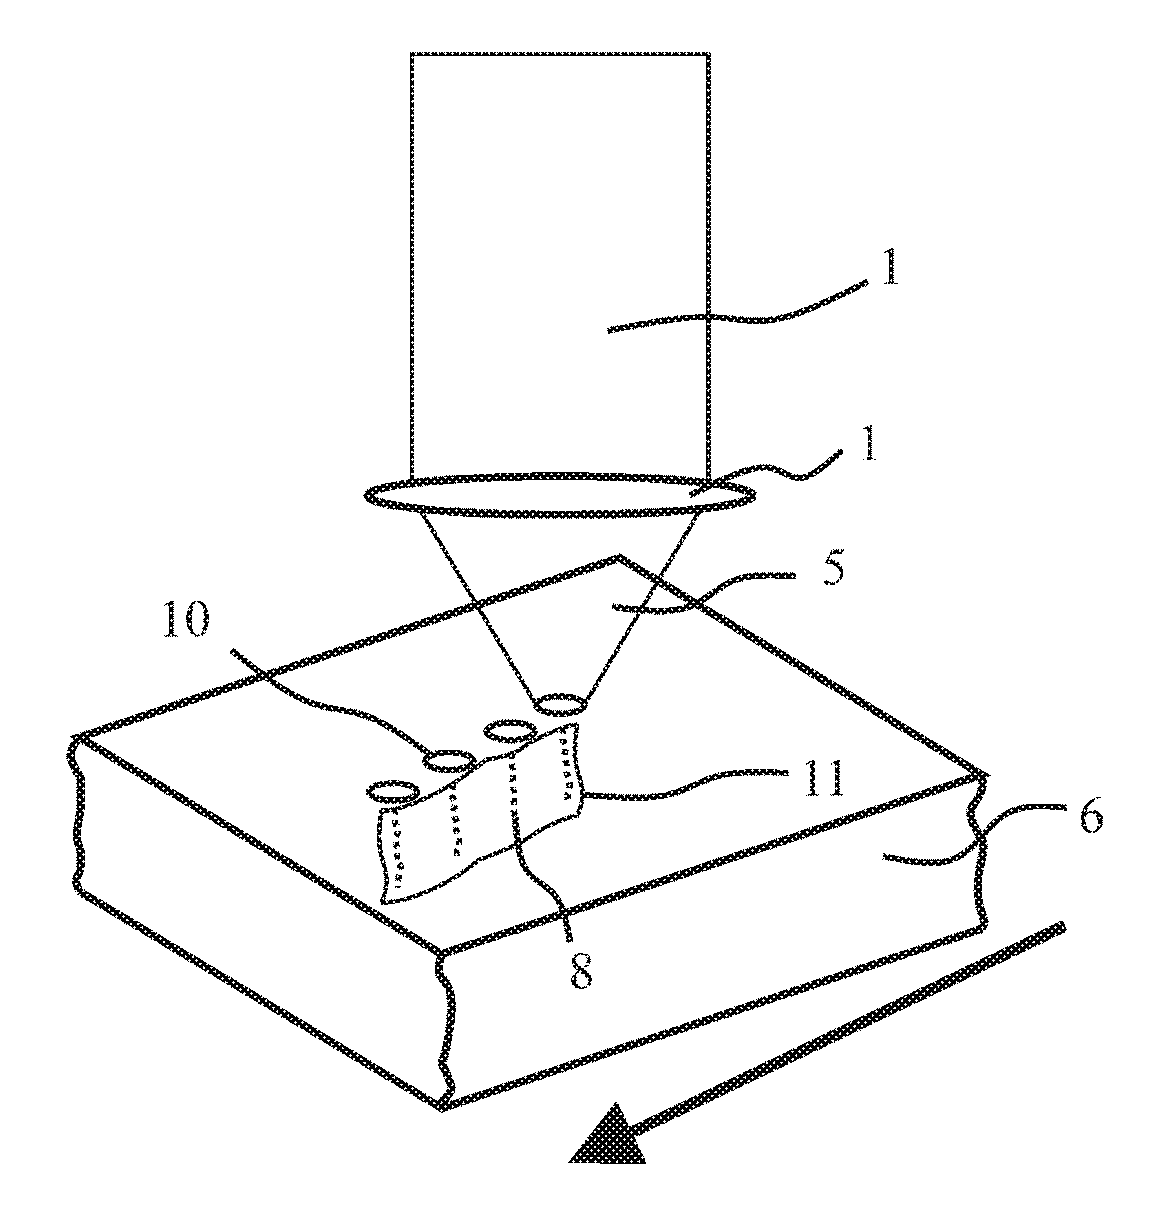 Method of laser processing for substrate cleaving or dicing through forming “spike-like” shaped damage structures